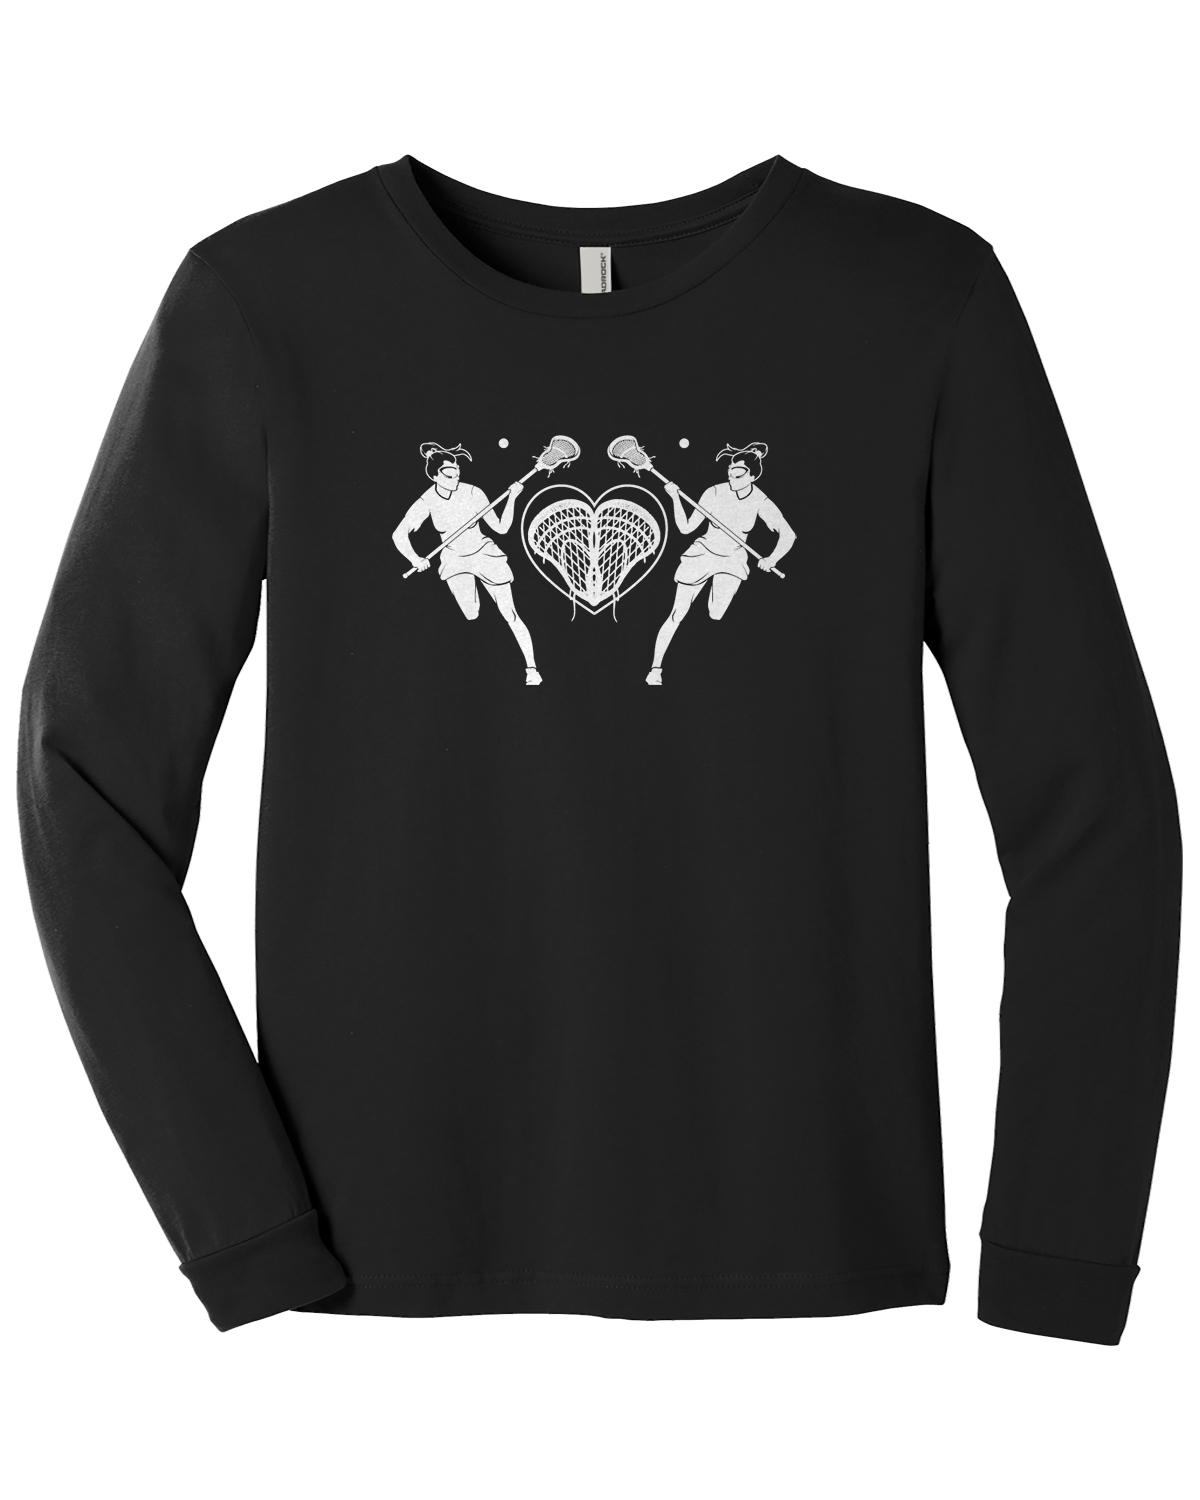 Boys Lacrosse Player Typography Youth Long Sleeve T-Shirt Team Gift Idea 